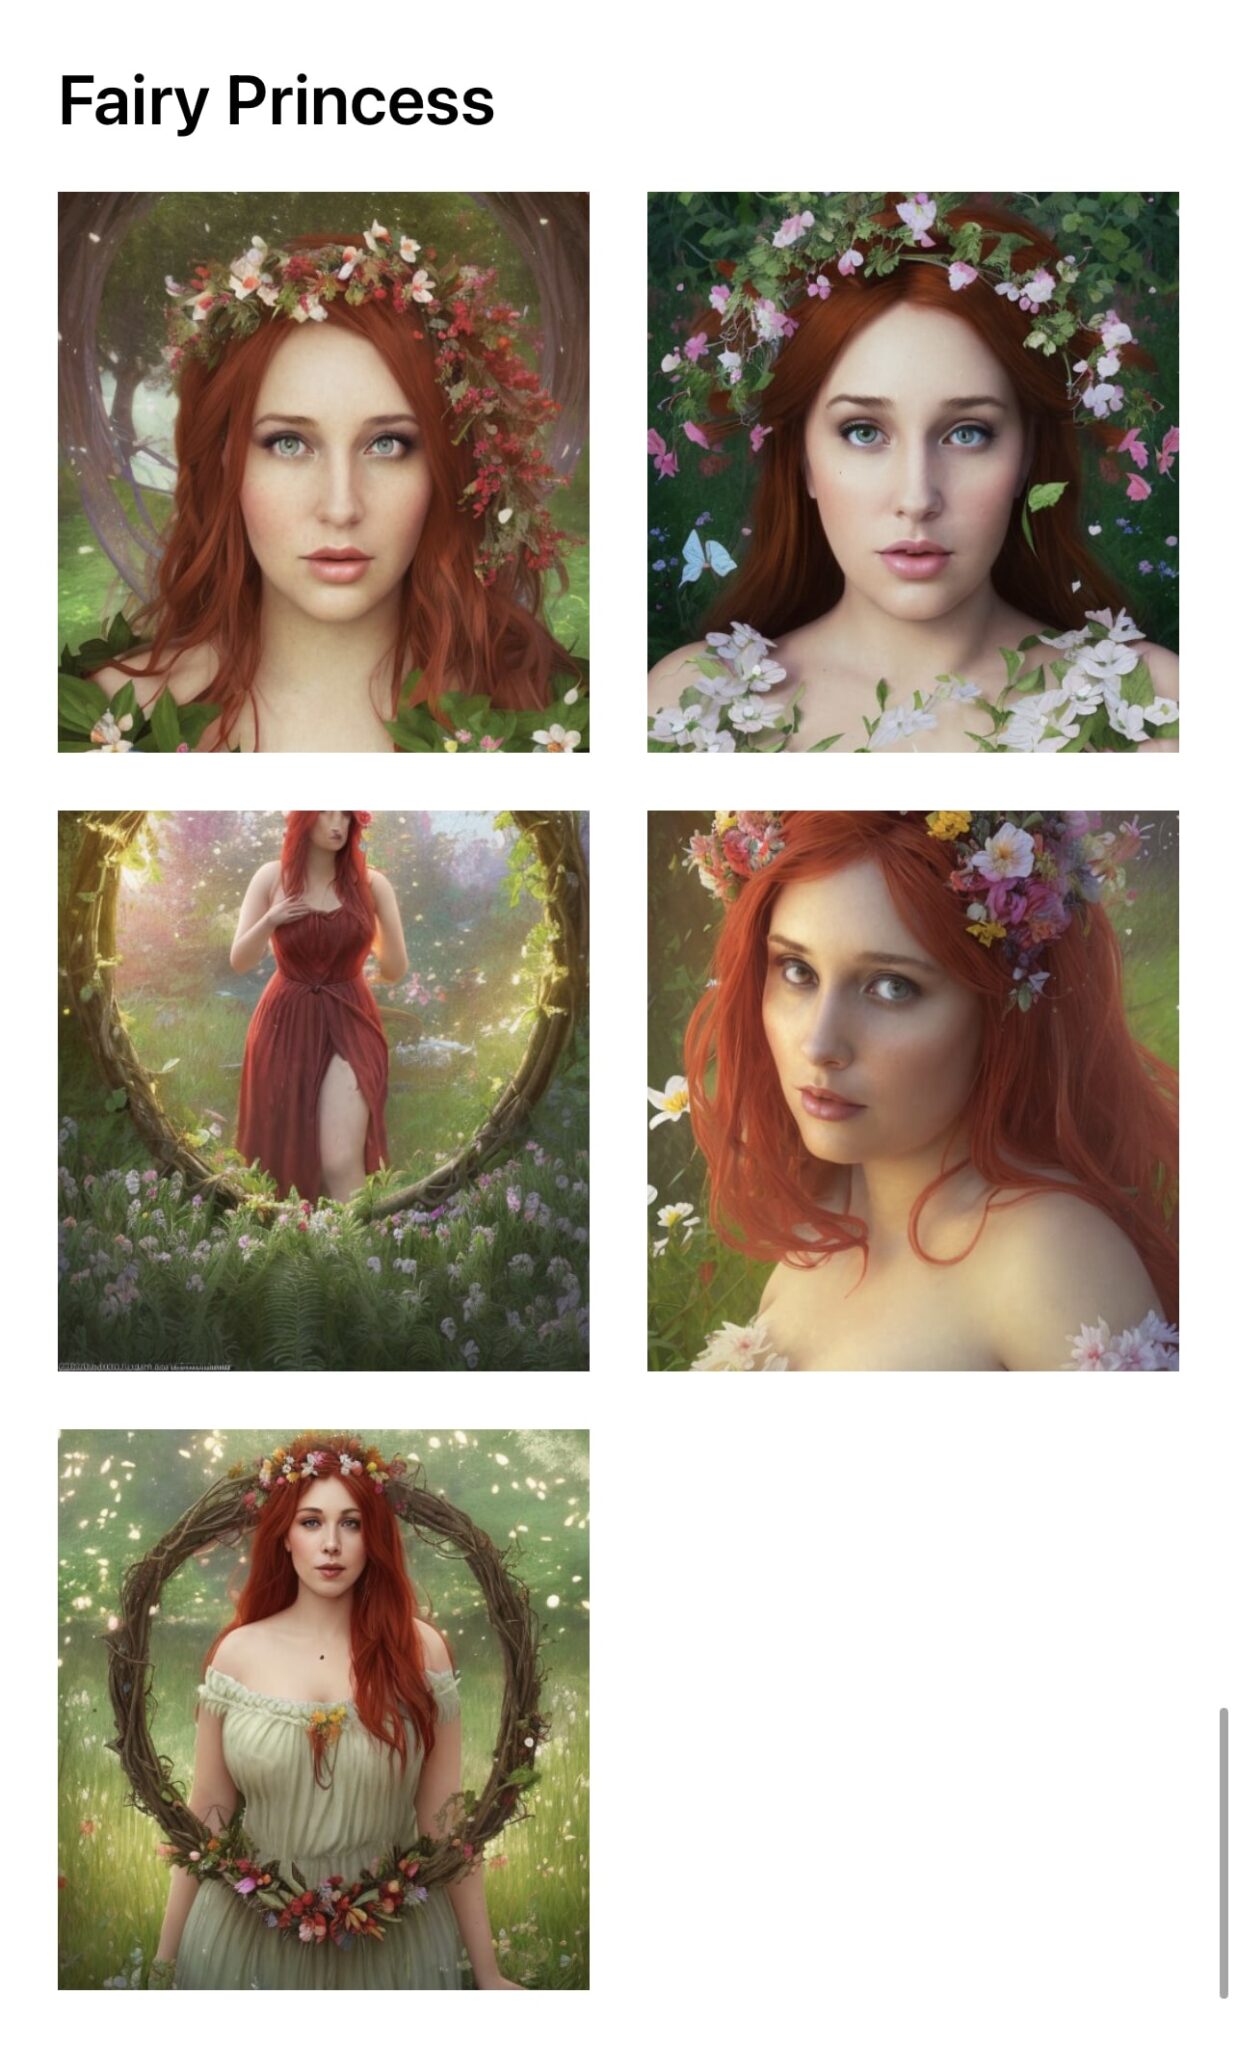 Fairy Princess printed at the top with photos of white women in a forrest.